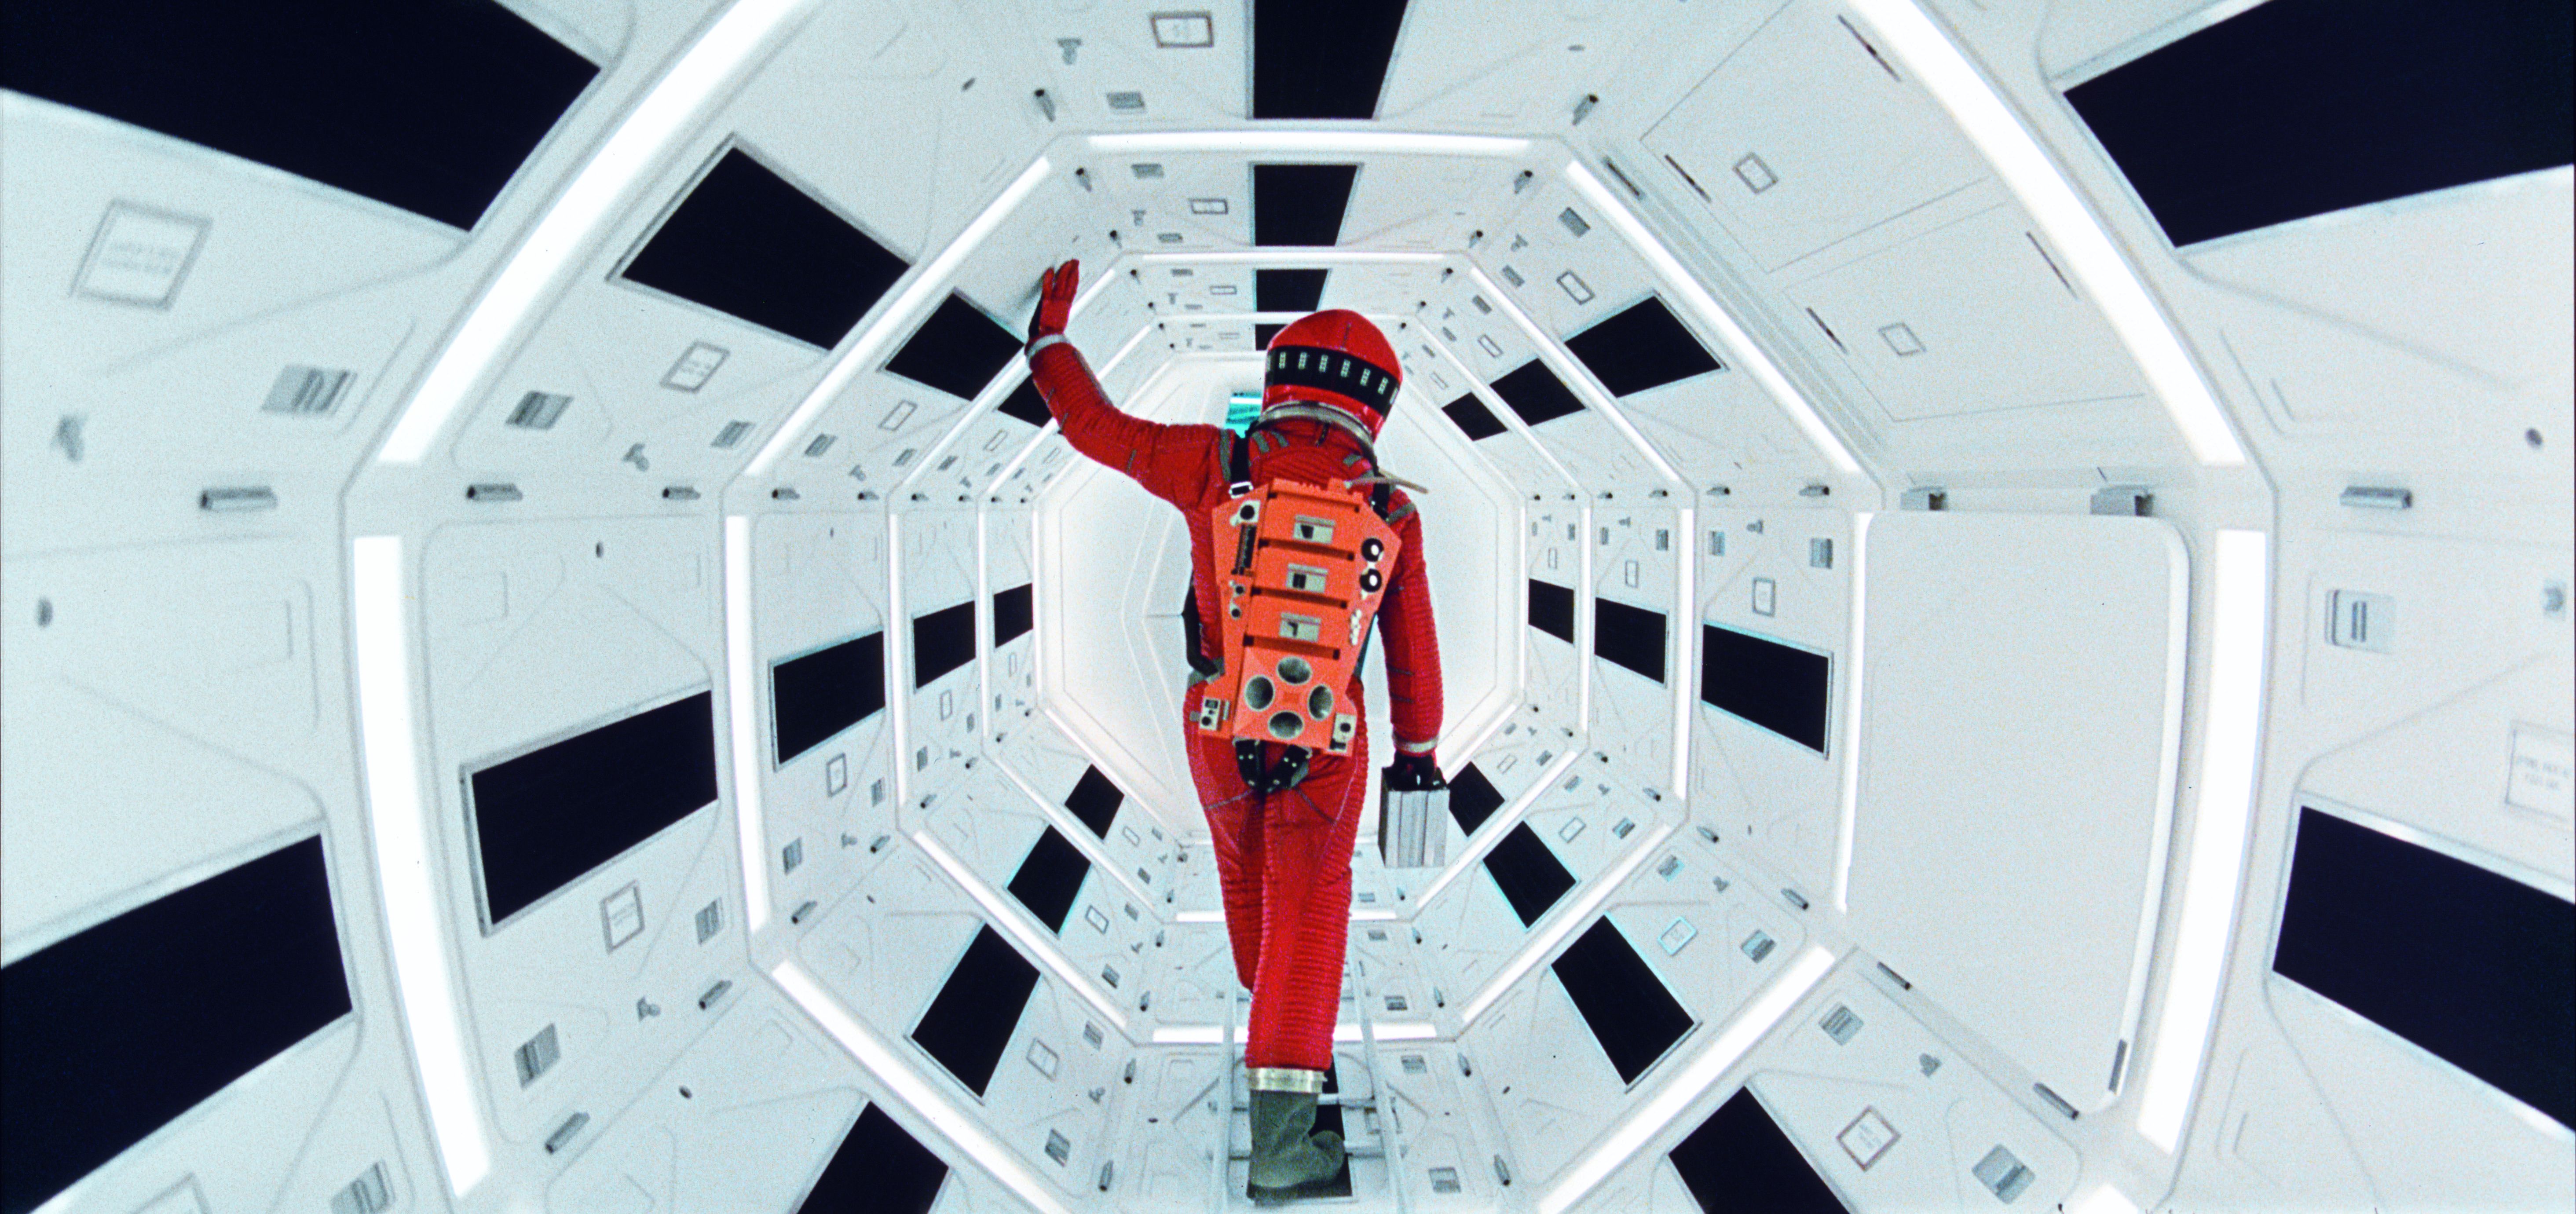 2001: A Space Odyssey, directed by Stanley Kubrick (1965-68; GB/United States) Film still © Warner Bros. Entertainment Inc.